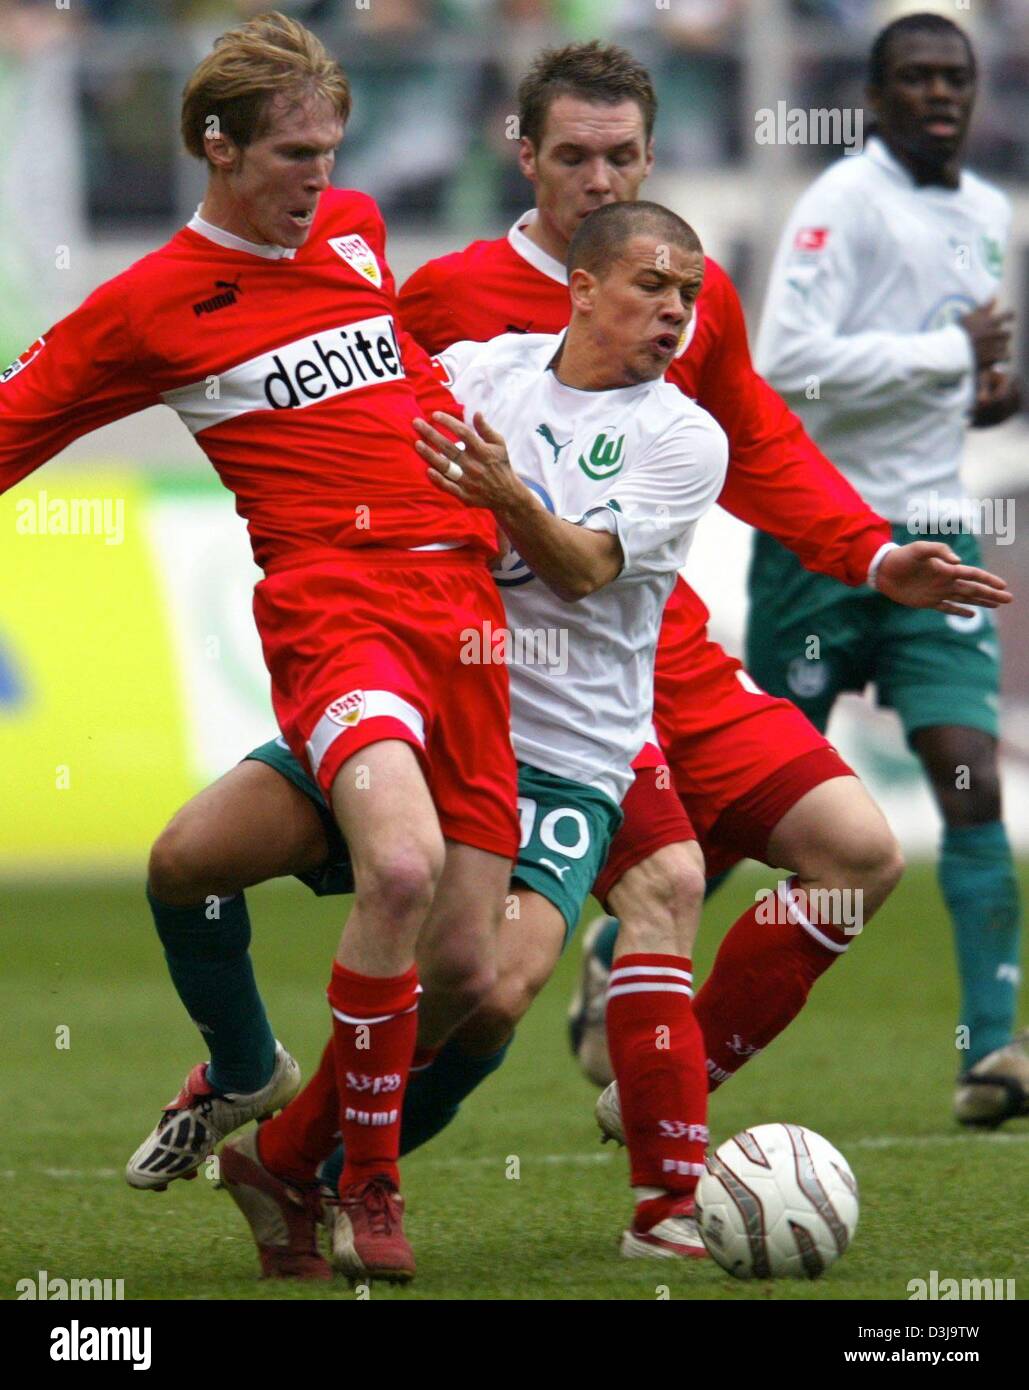 (dpa) - Wolfsburg's Andres d'Alessandro (C) struggles for the ball with Stuttgart's players Heiko Gerber (L) and Christian Tiffert during the Bundesliga soccer game between VfL Wolfsburg and VfB Stuttgart in Wolfsburg, Germany, 3 April 2004. Stuttgart won the game by a score of 5-1 against Wolfsburg. Stock Photo